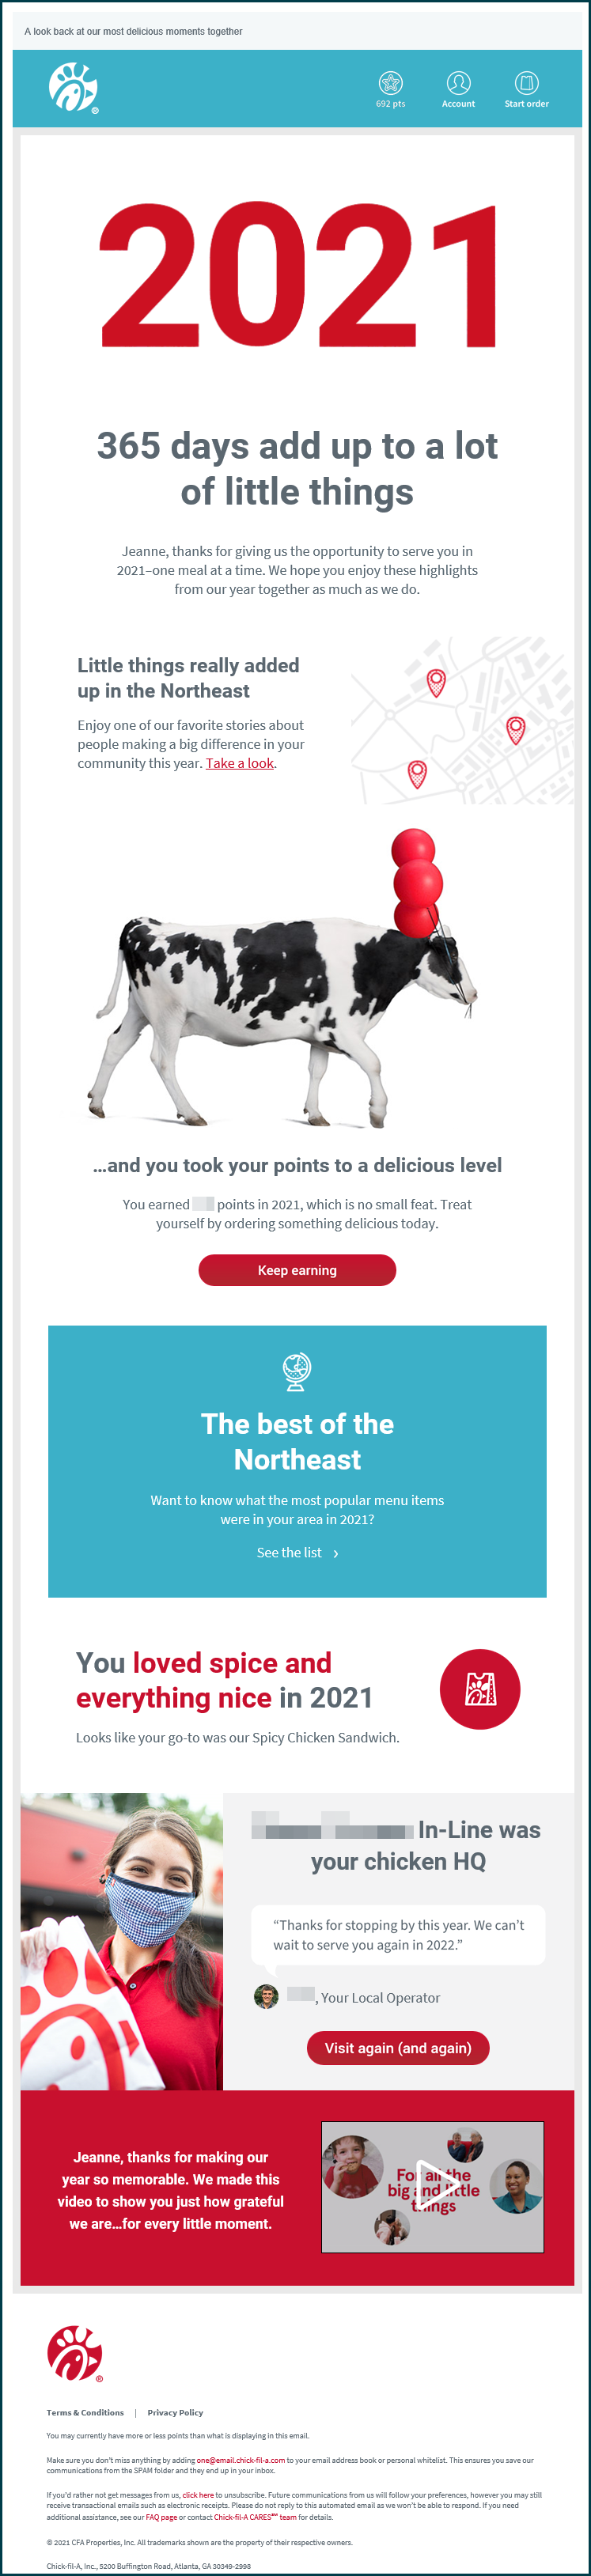 Can’t Let Go: Personalization Fail from Chick-fil-A